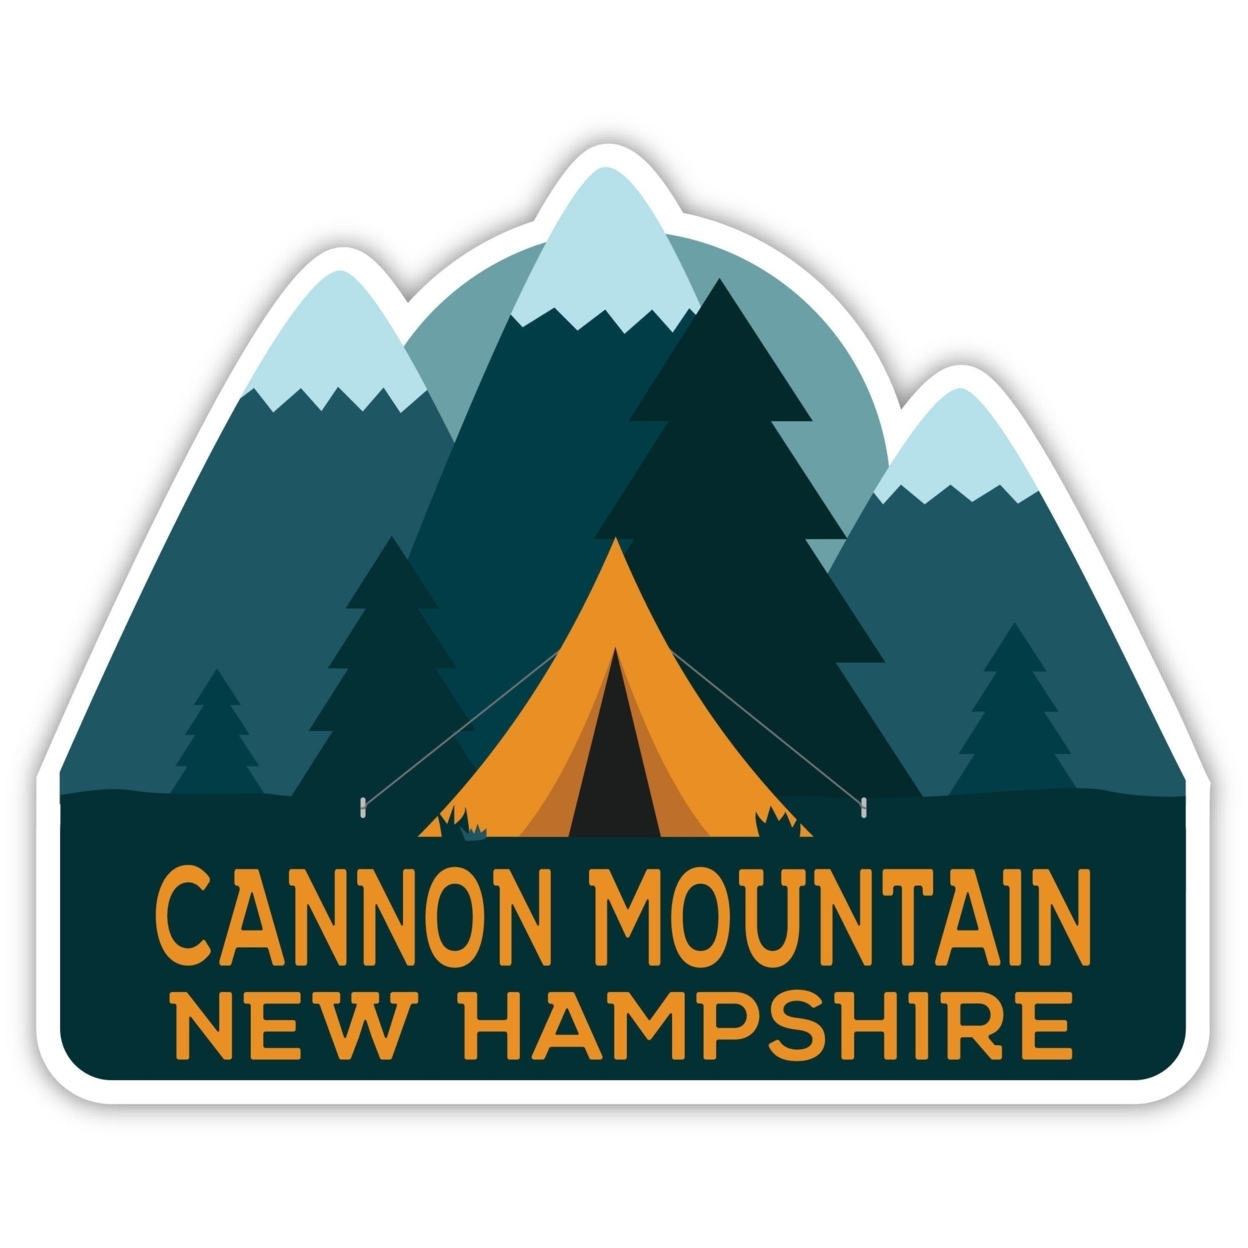 Cannon Mountain New Hampshire Souvenir Decorative Stickers (Choose Theme And Size) - 4-Pack, 8-Inch, Tent